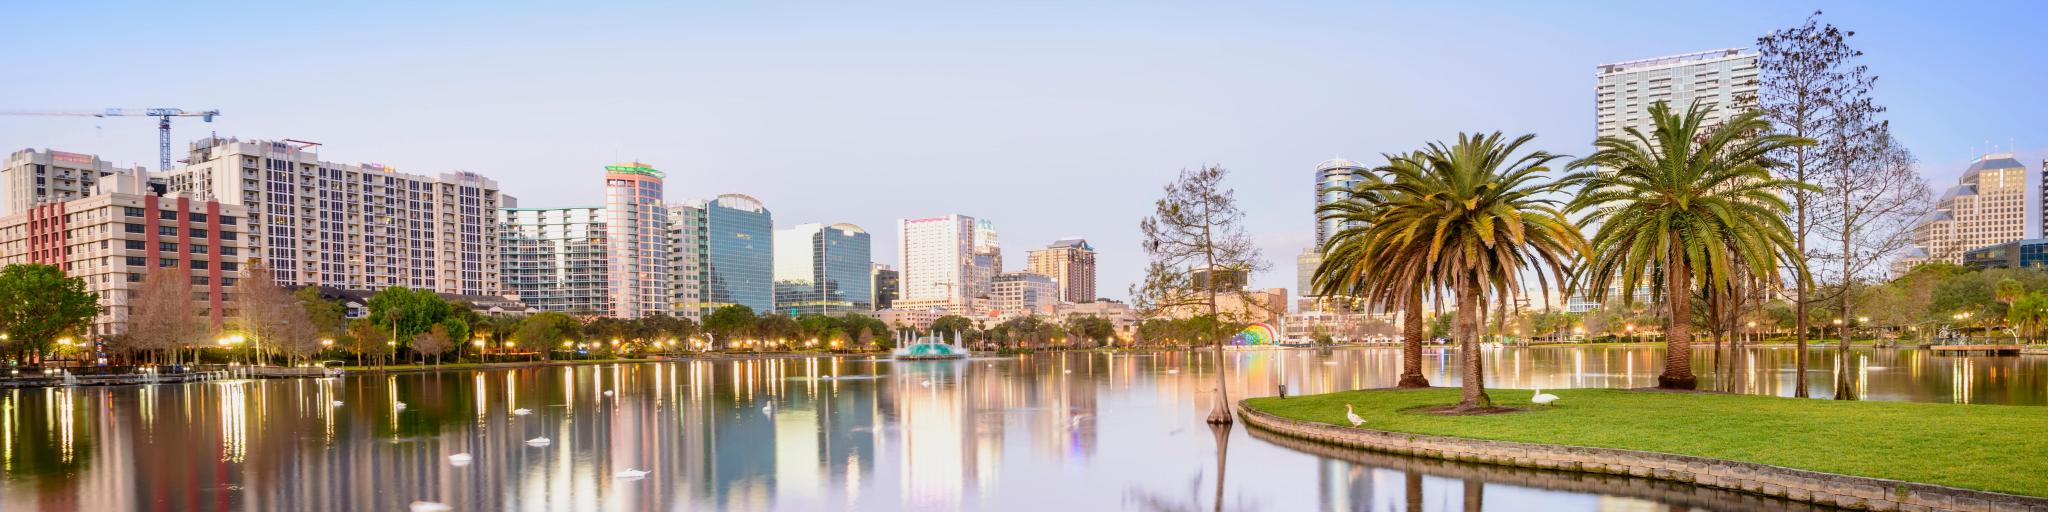 Orlando. Photo taken in the Lake Eola Park with the silhouette of the city reflecting on the lake at sunset. 